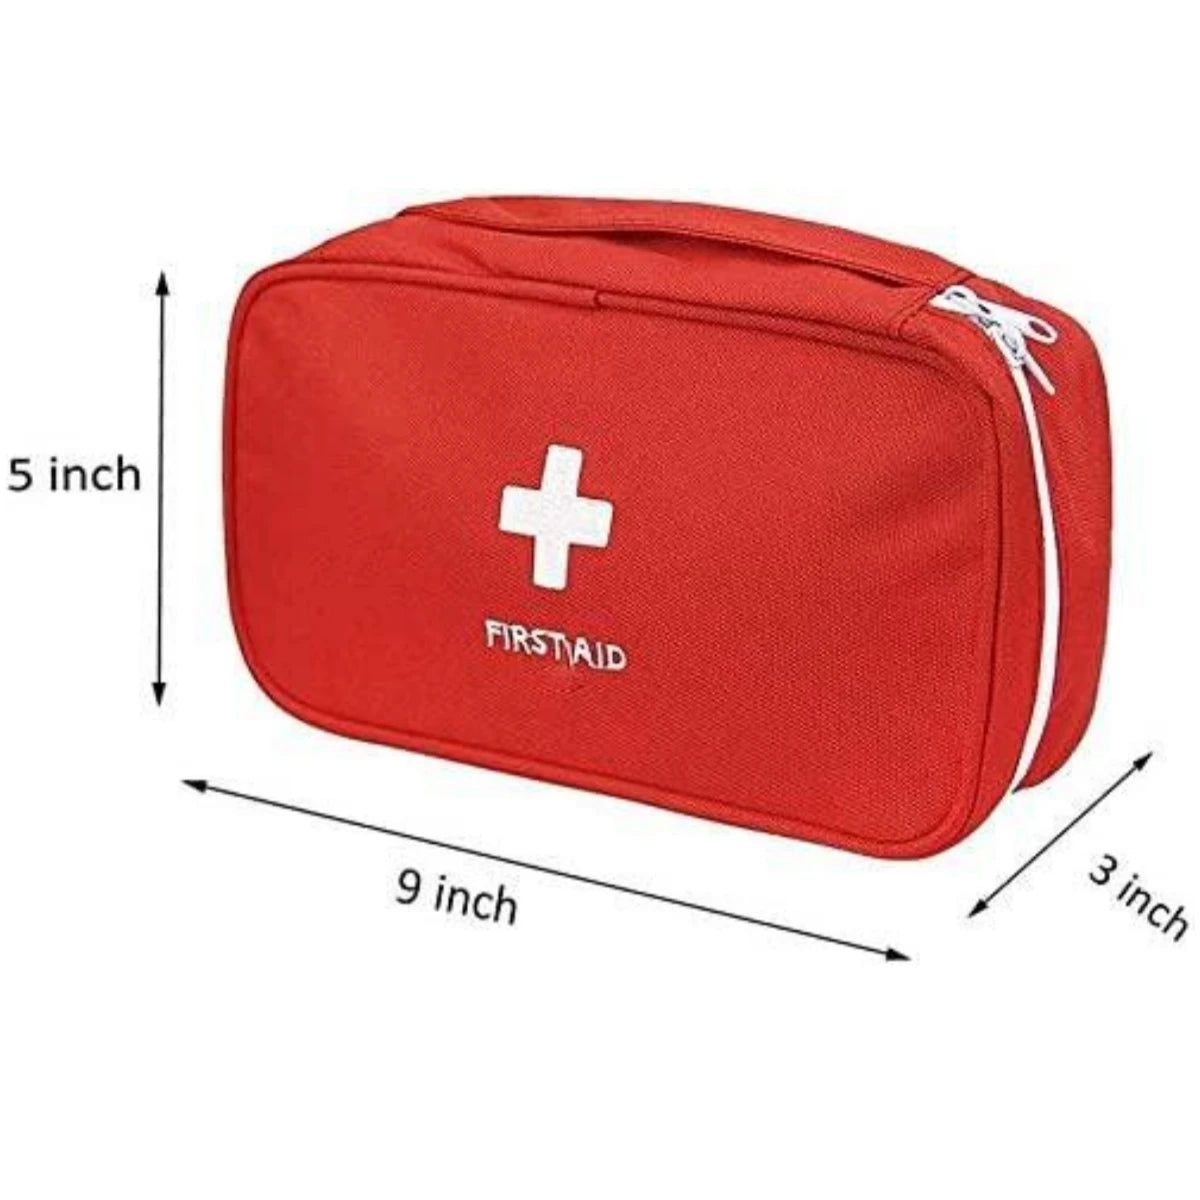 Portable Storage Bag First Aid Emergency Medicine Bag for Outdoor Survival Organizer Emergency Kits Package Travel